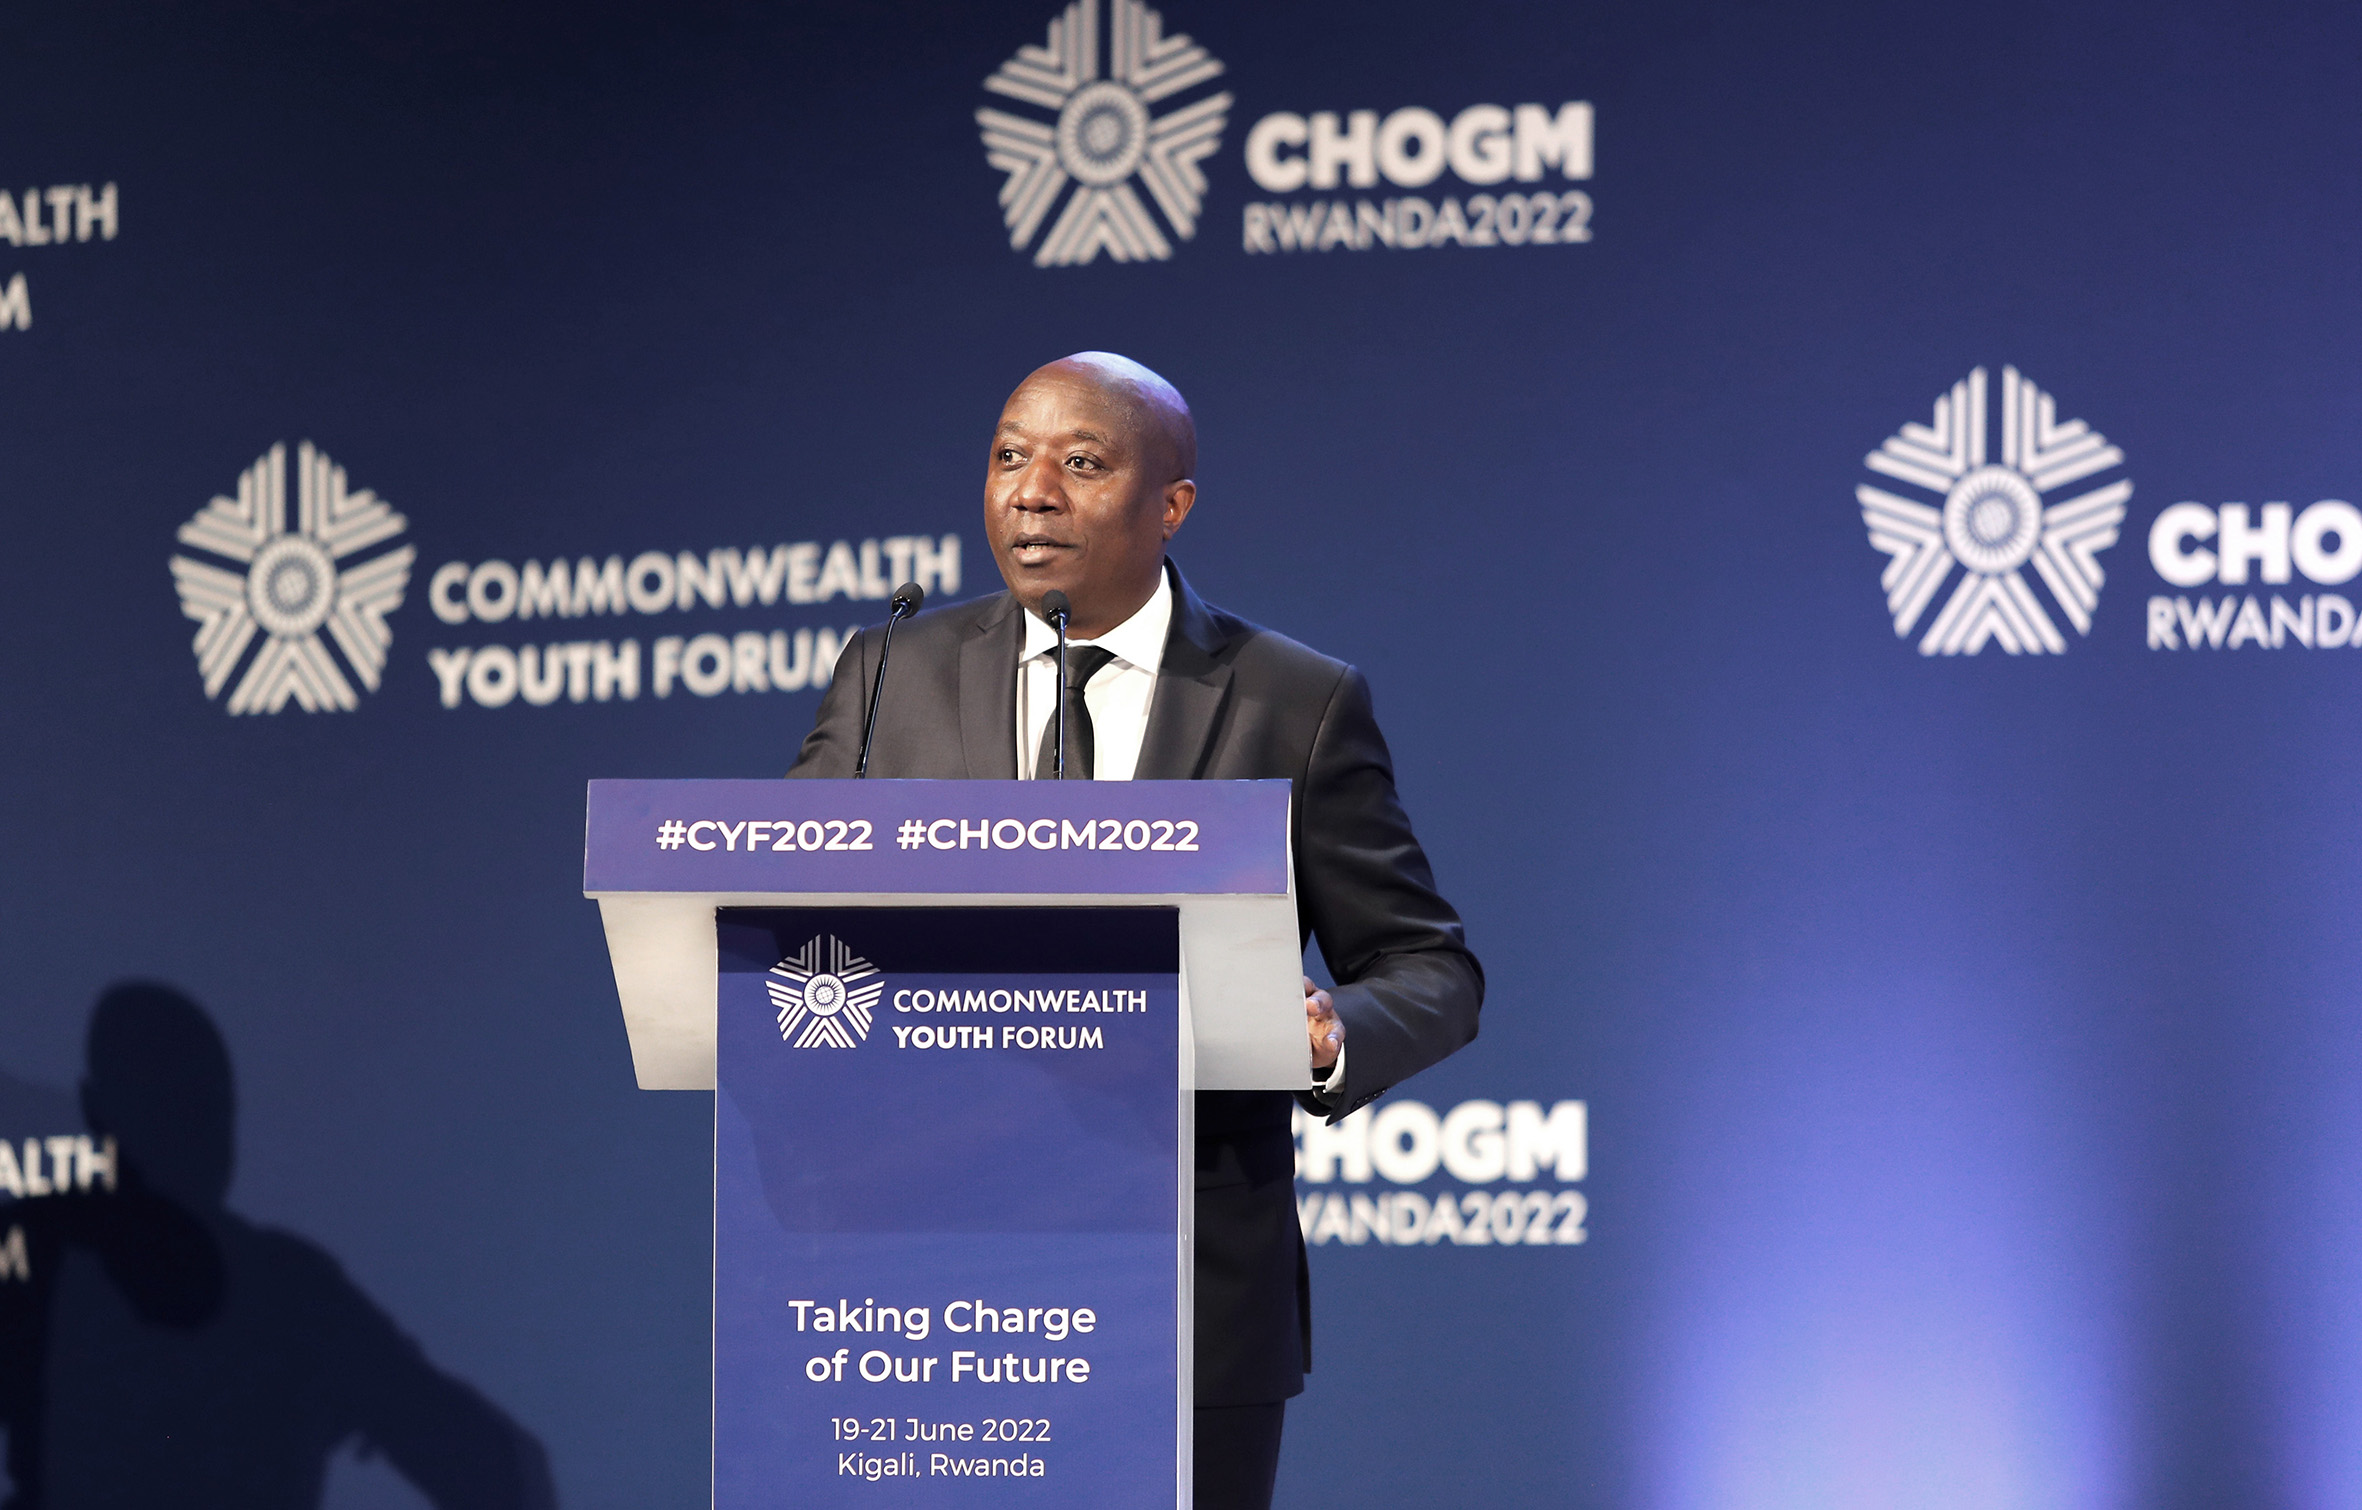 Prime Minister Edouard Ngirente delivers his remarks at the closure of the three-day Commonwealth Youth Forum in Kigali, on June 21. Photo: Fulgence Kwizera.